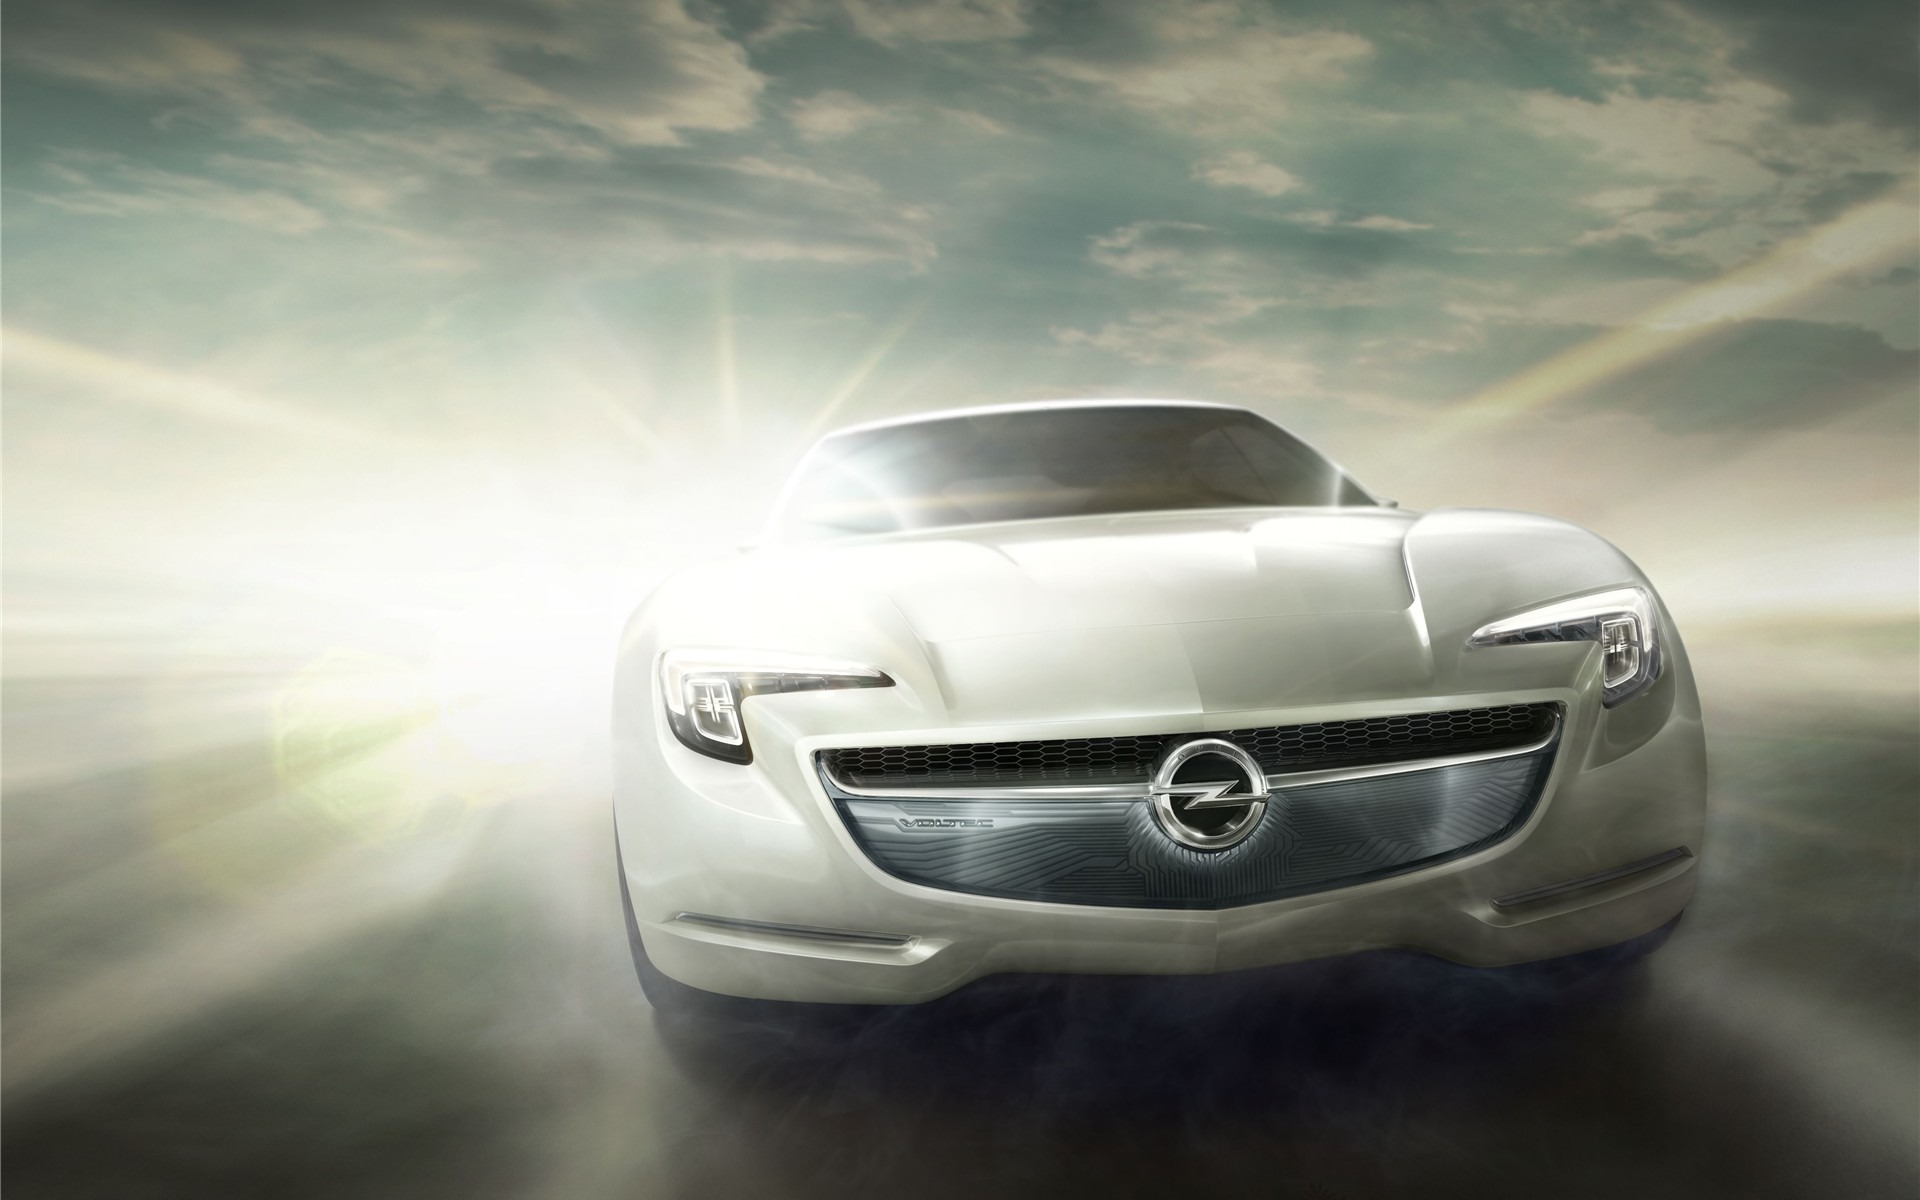 Special edition of concept cars wallpaper (4) #20 - 1920x1200